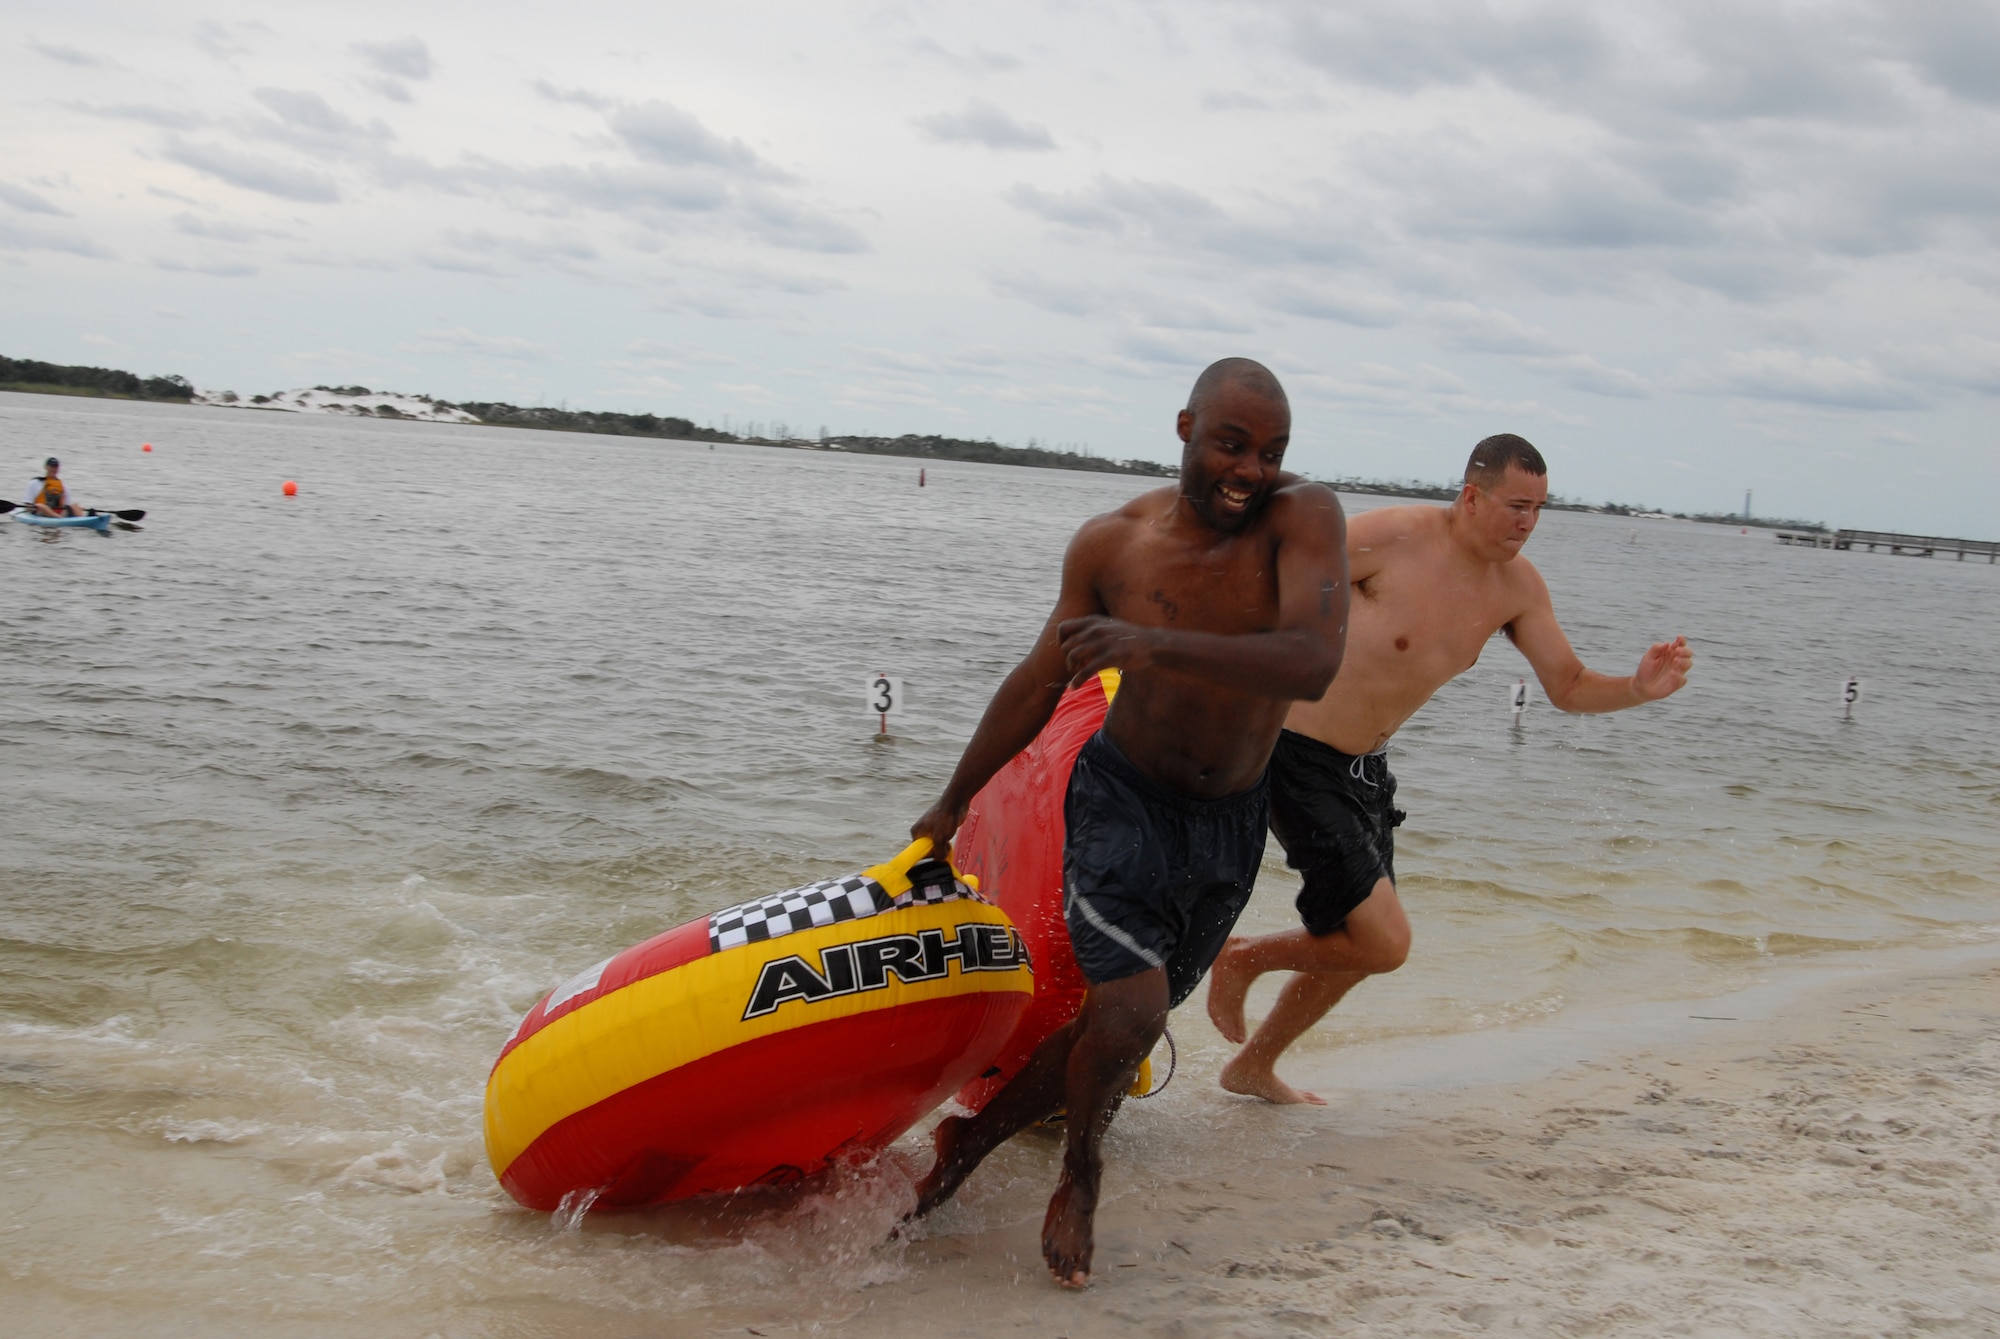 U.S. Air Force Staff Sgt. Briane Rock, 1st Special Operations Force Support Squadron (left), and 1st Lt. Andrew Burns, 413th Flight Test Squadron (right), race to the finish line in the inner tube relay race during the H2Olympics at Hurlburt Field, Fla., Oct. 2, 2009. (U. S. Air Force photo by Staff Sgt. Orly N. Tyrell)